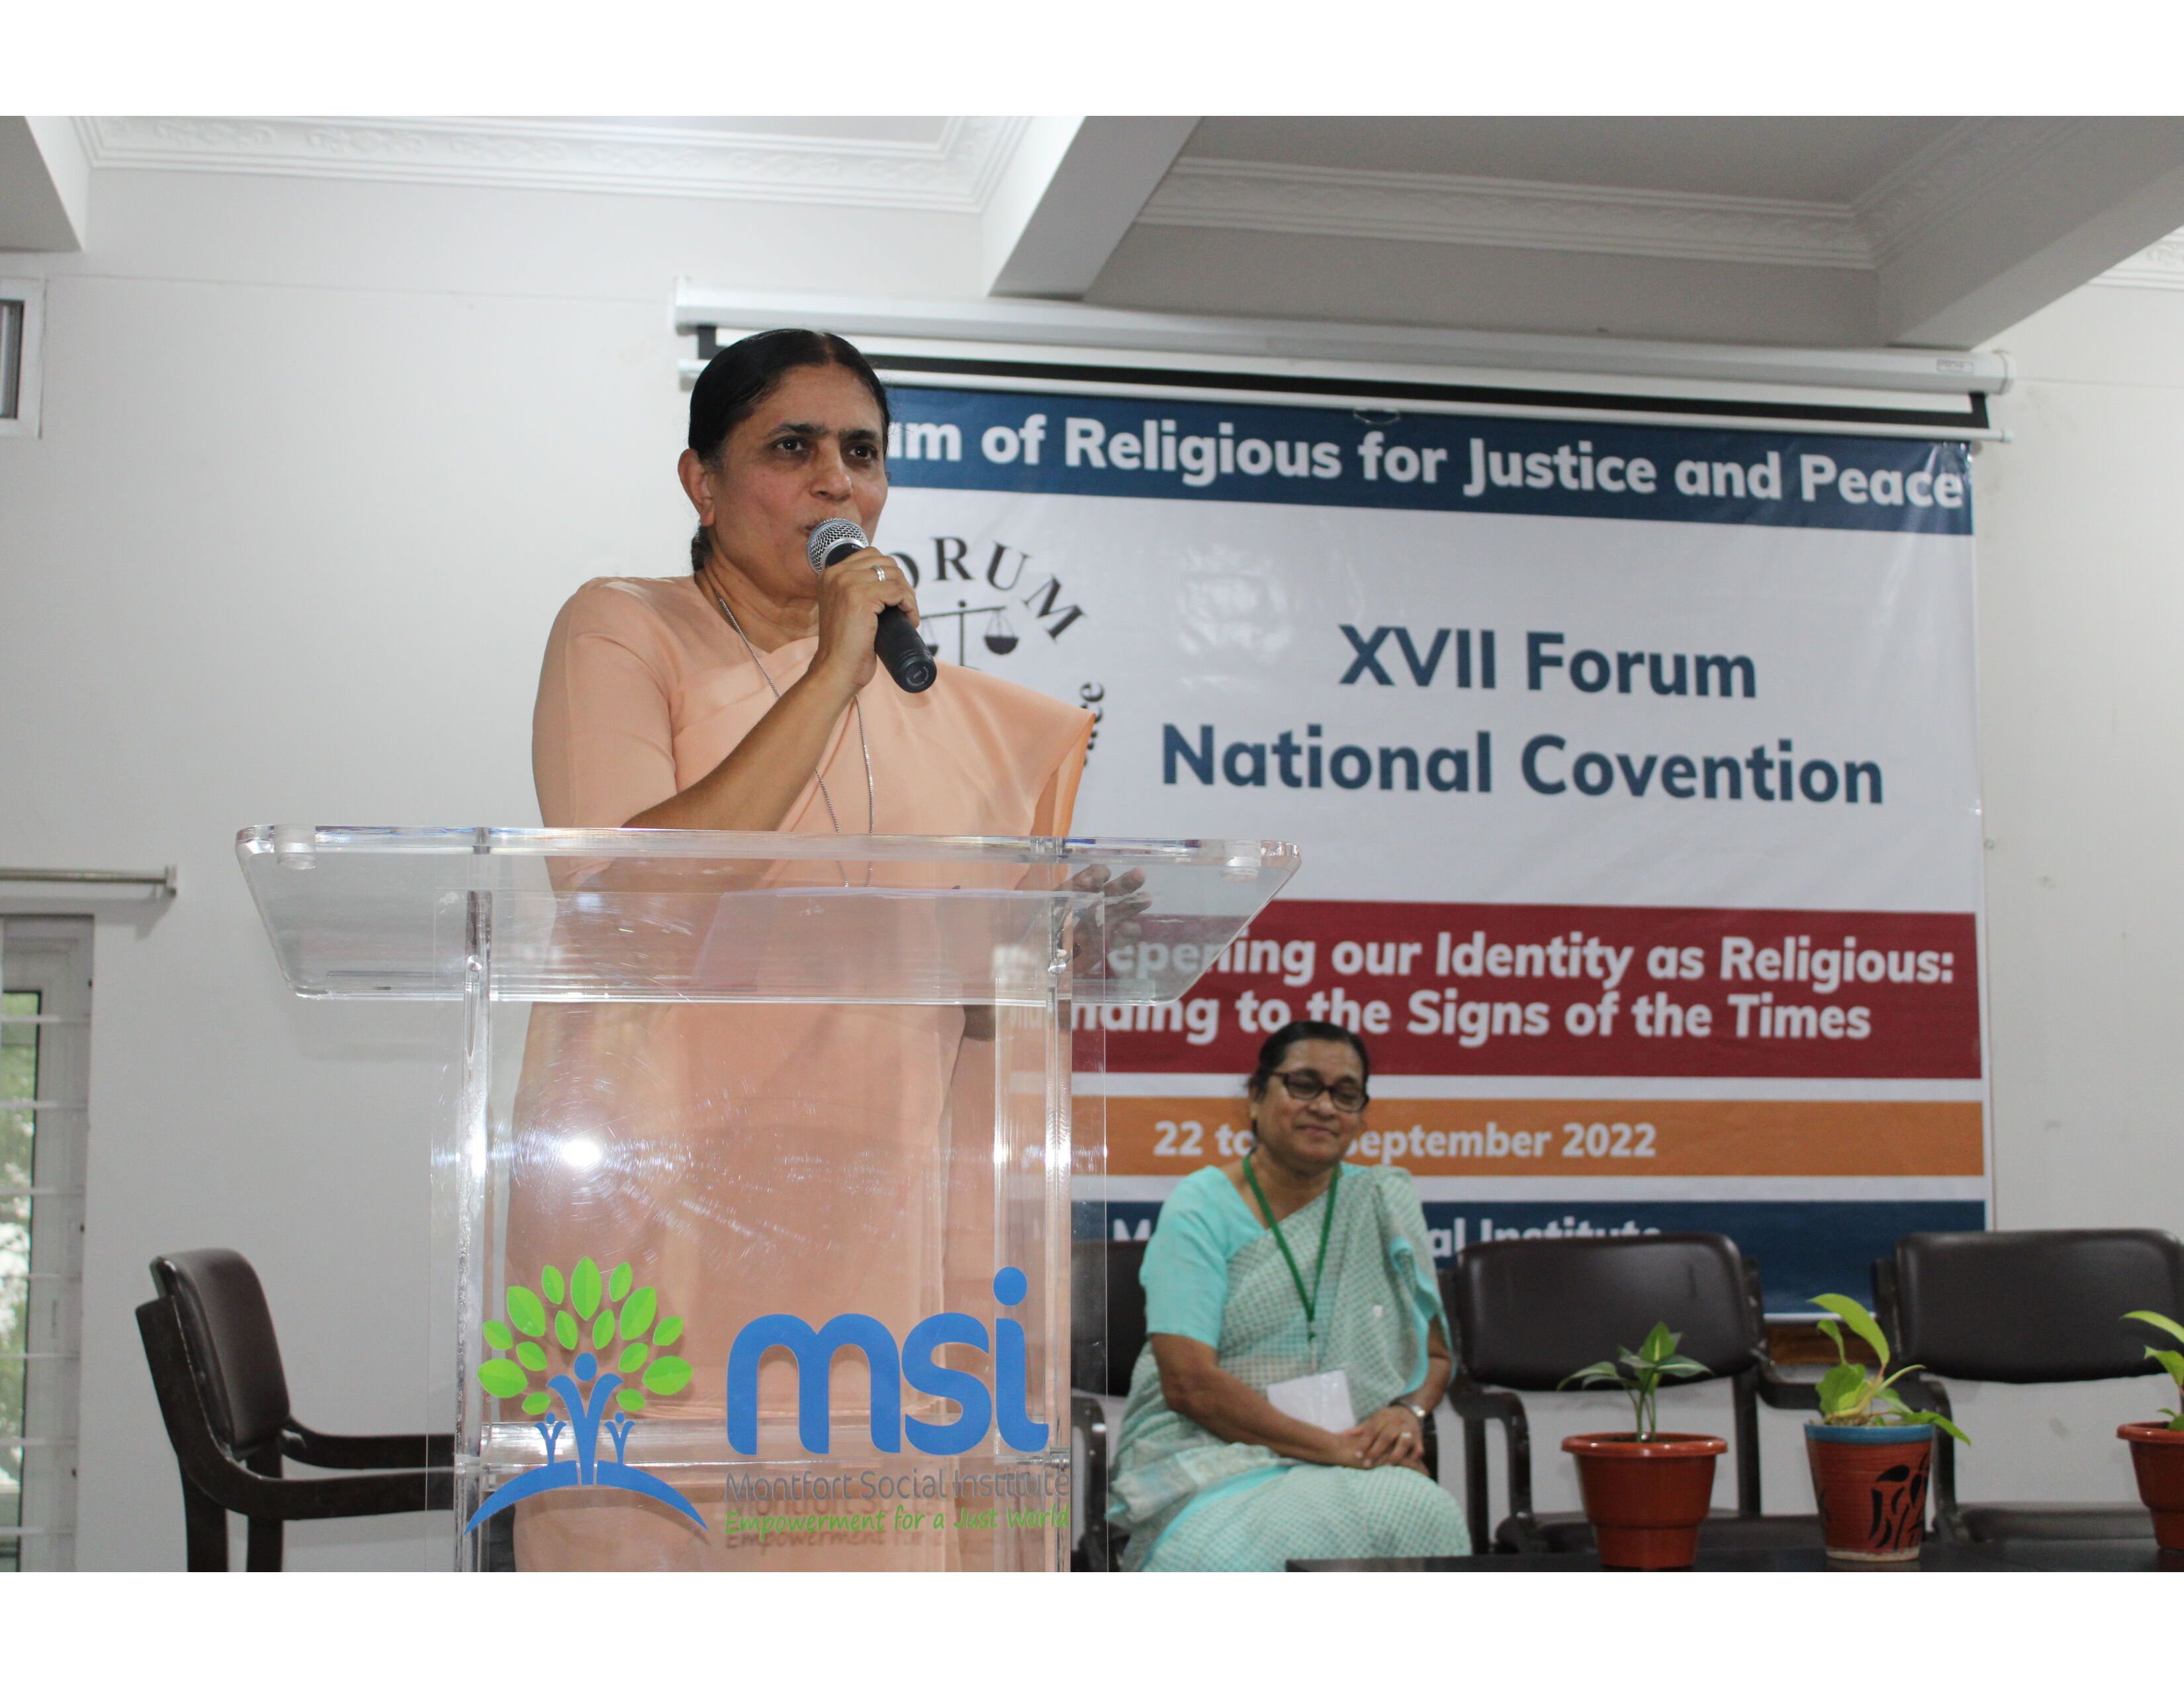 The ‘Forum of Religious for Justice and Peace’ held its XVII National Convention at the Montfort Social Institute, Hyderabad, Telangana from 22 to 24 September 2022.